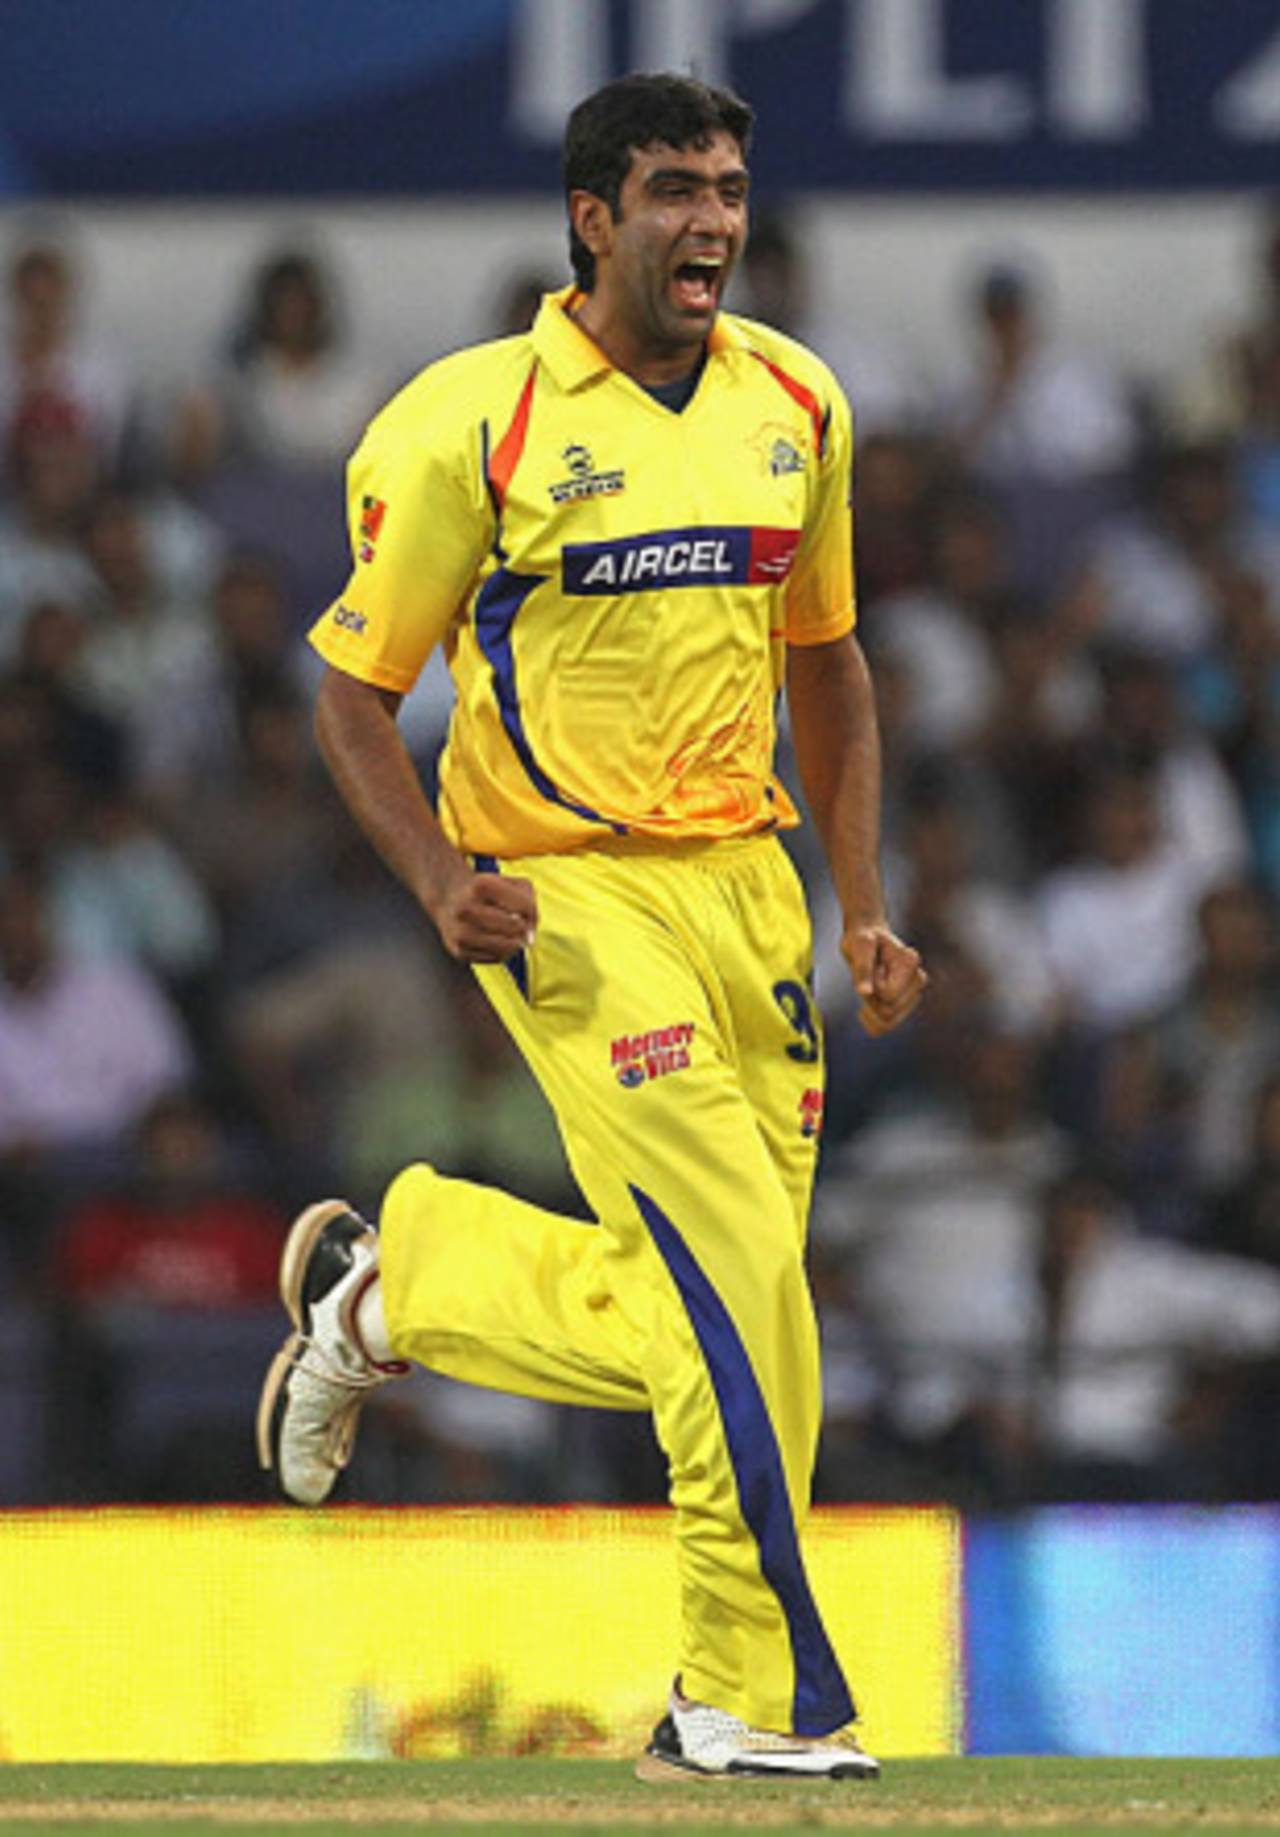 R Ashwin took two wickets in a tight spell of bowling, Deccan Chargers v Chennai Super Kings, IPL, Nagpur, April 10, 2010